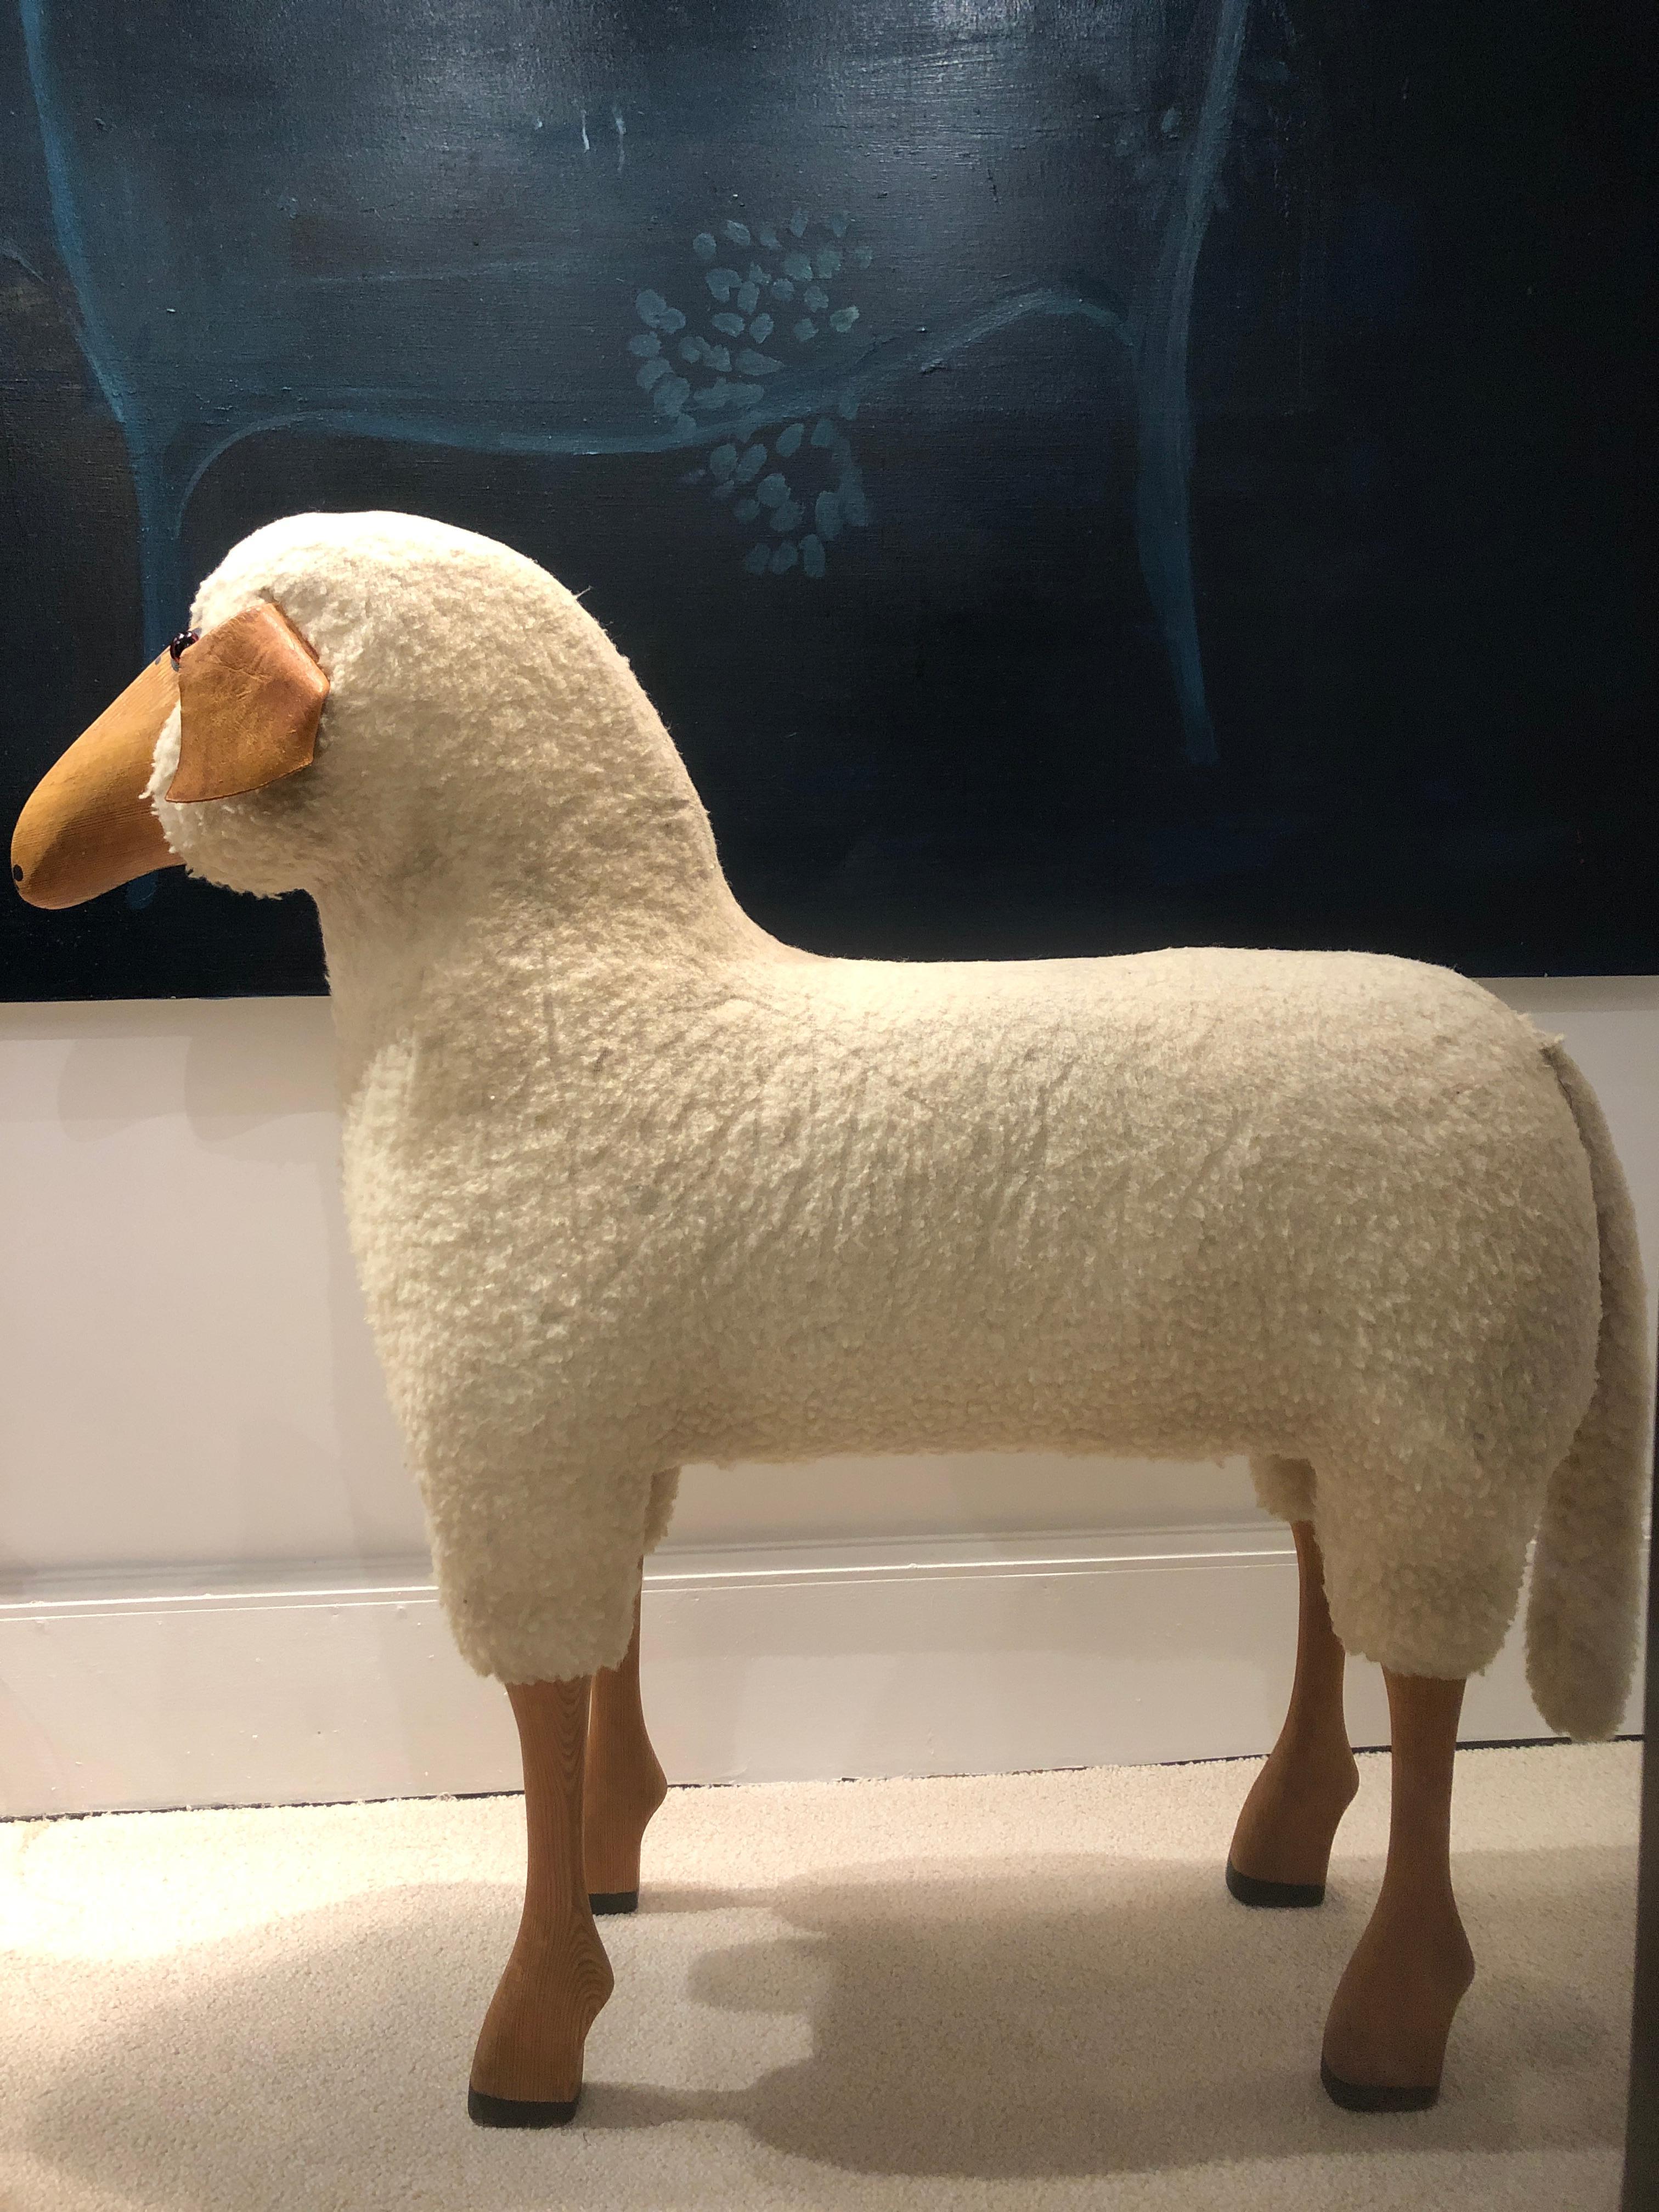 Handcrafted sheep by Hans-Peter Krafft for German company Meier. The sheep is suitable as original seating or for decoration like a Lalanne's sheep.
This original life seize sheep is a collector's item and will adds so much character and a